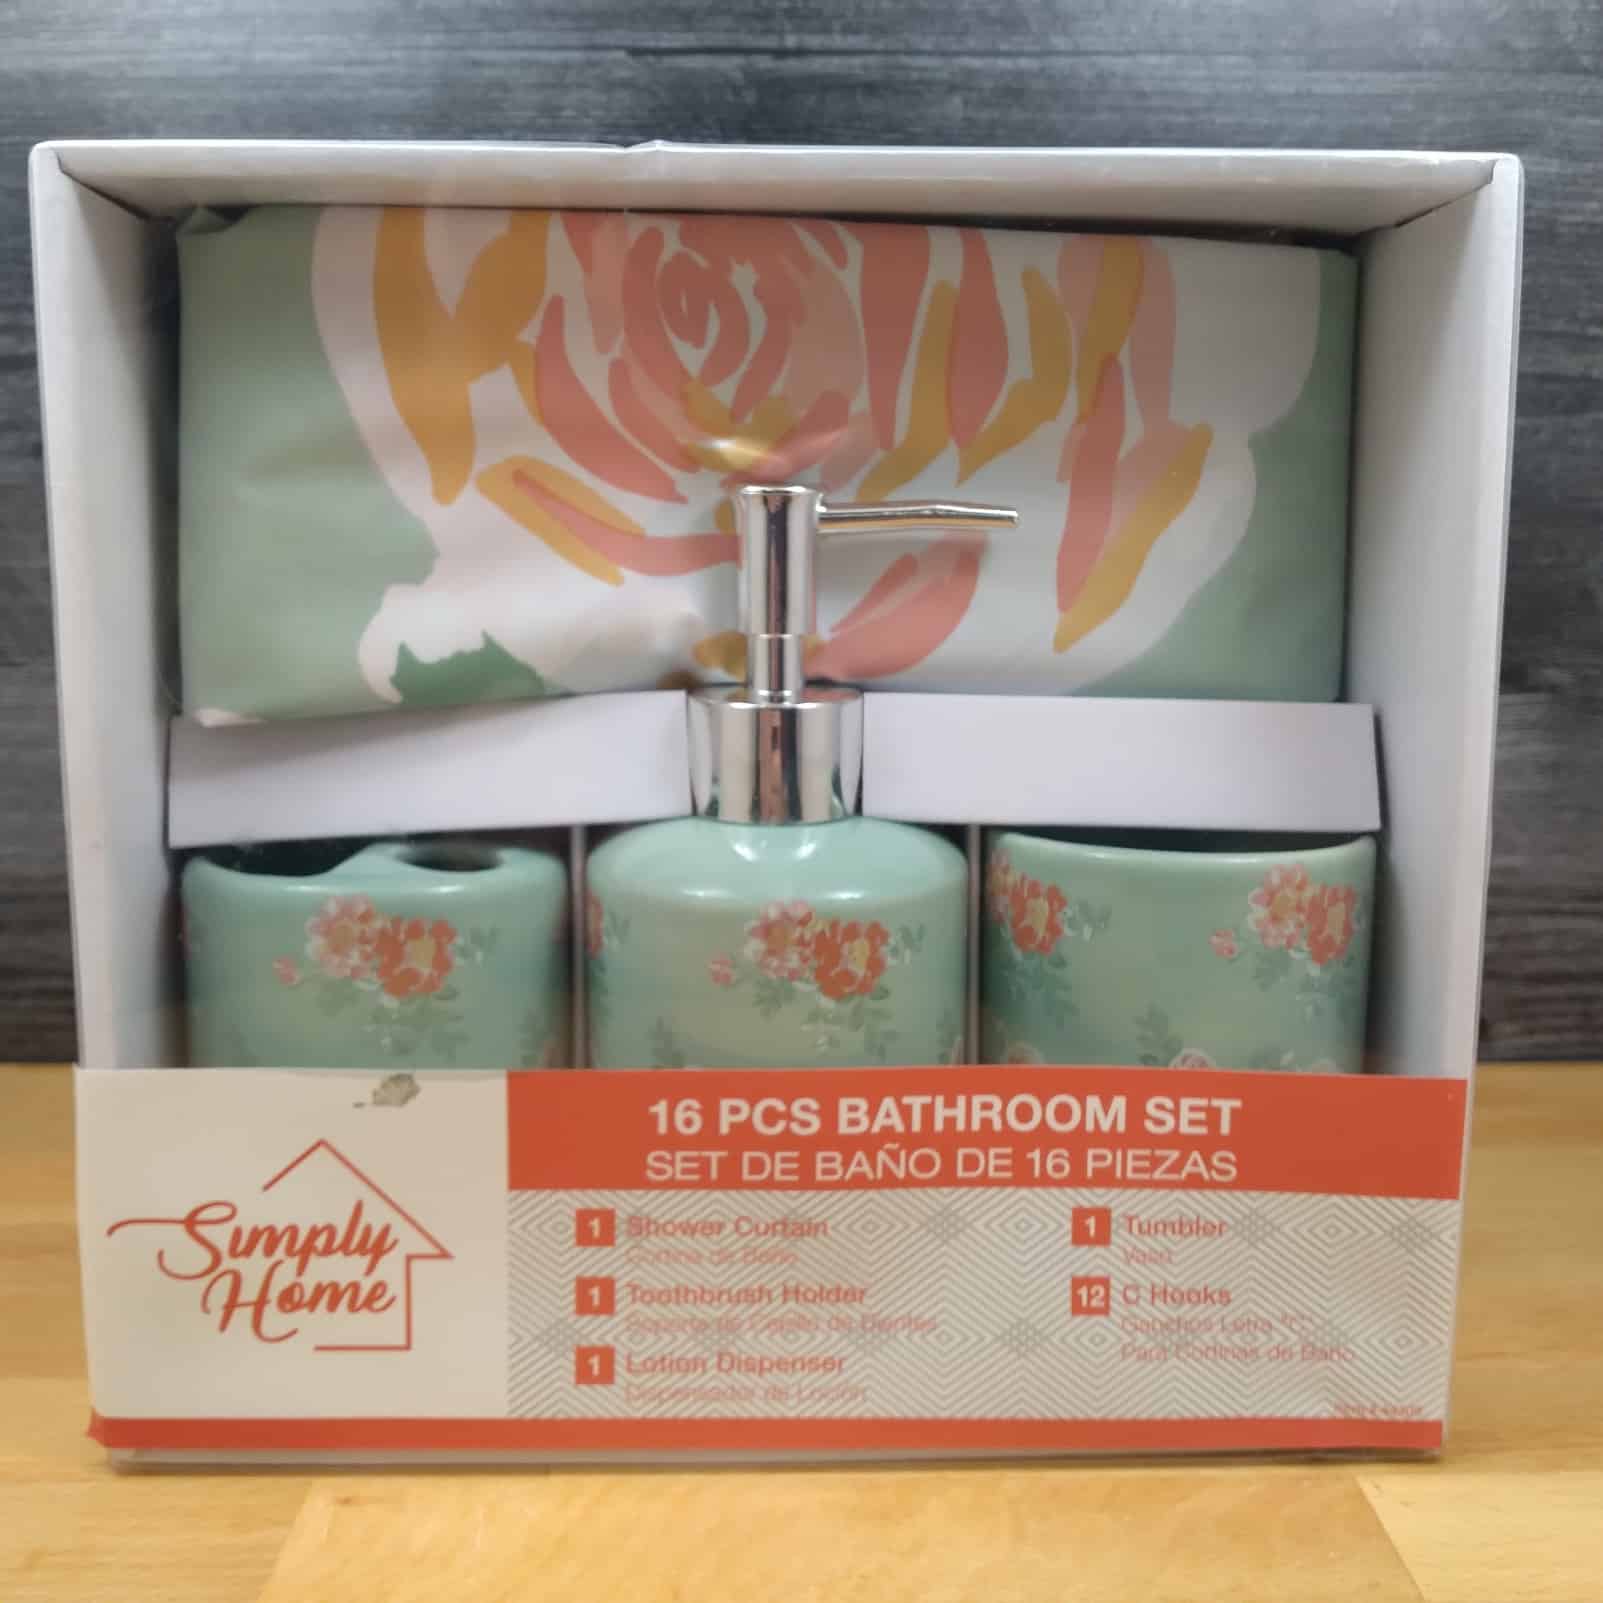 This Rose Bathroom Set Design Toothbrush Holder Soap Dispenser Shower Curtain is made with love by Premier Homegoods! Shop more unique gift ideas today with Spots Initiatives, the best way to support creators.